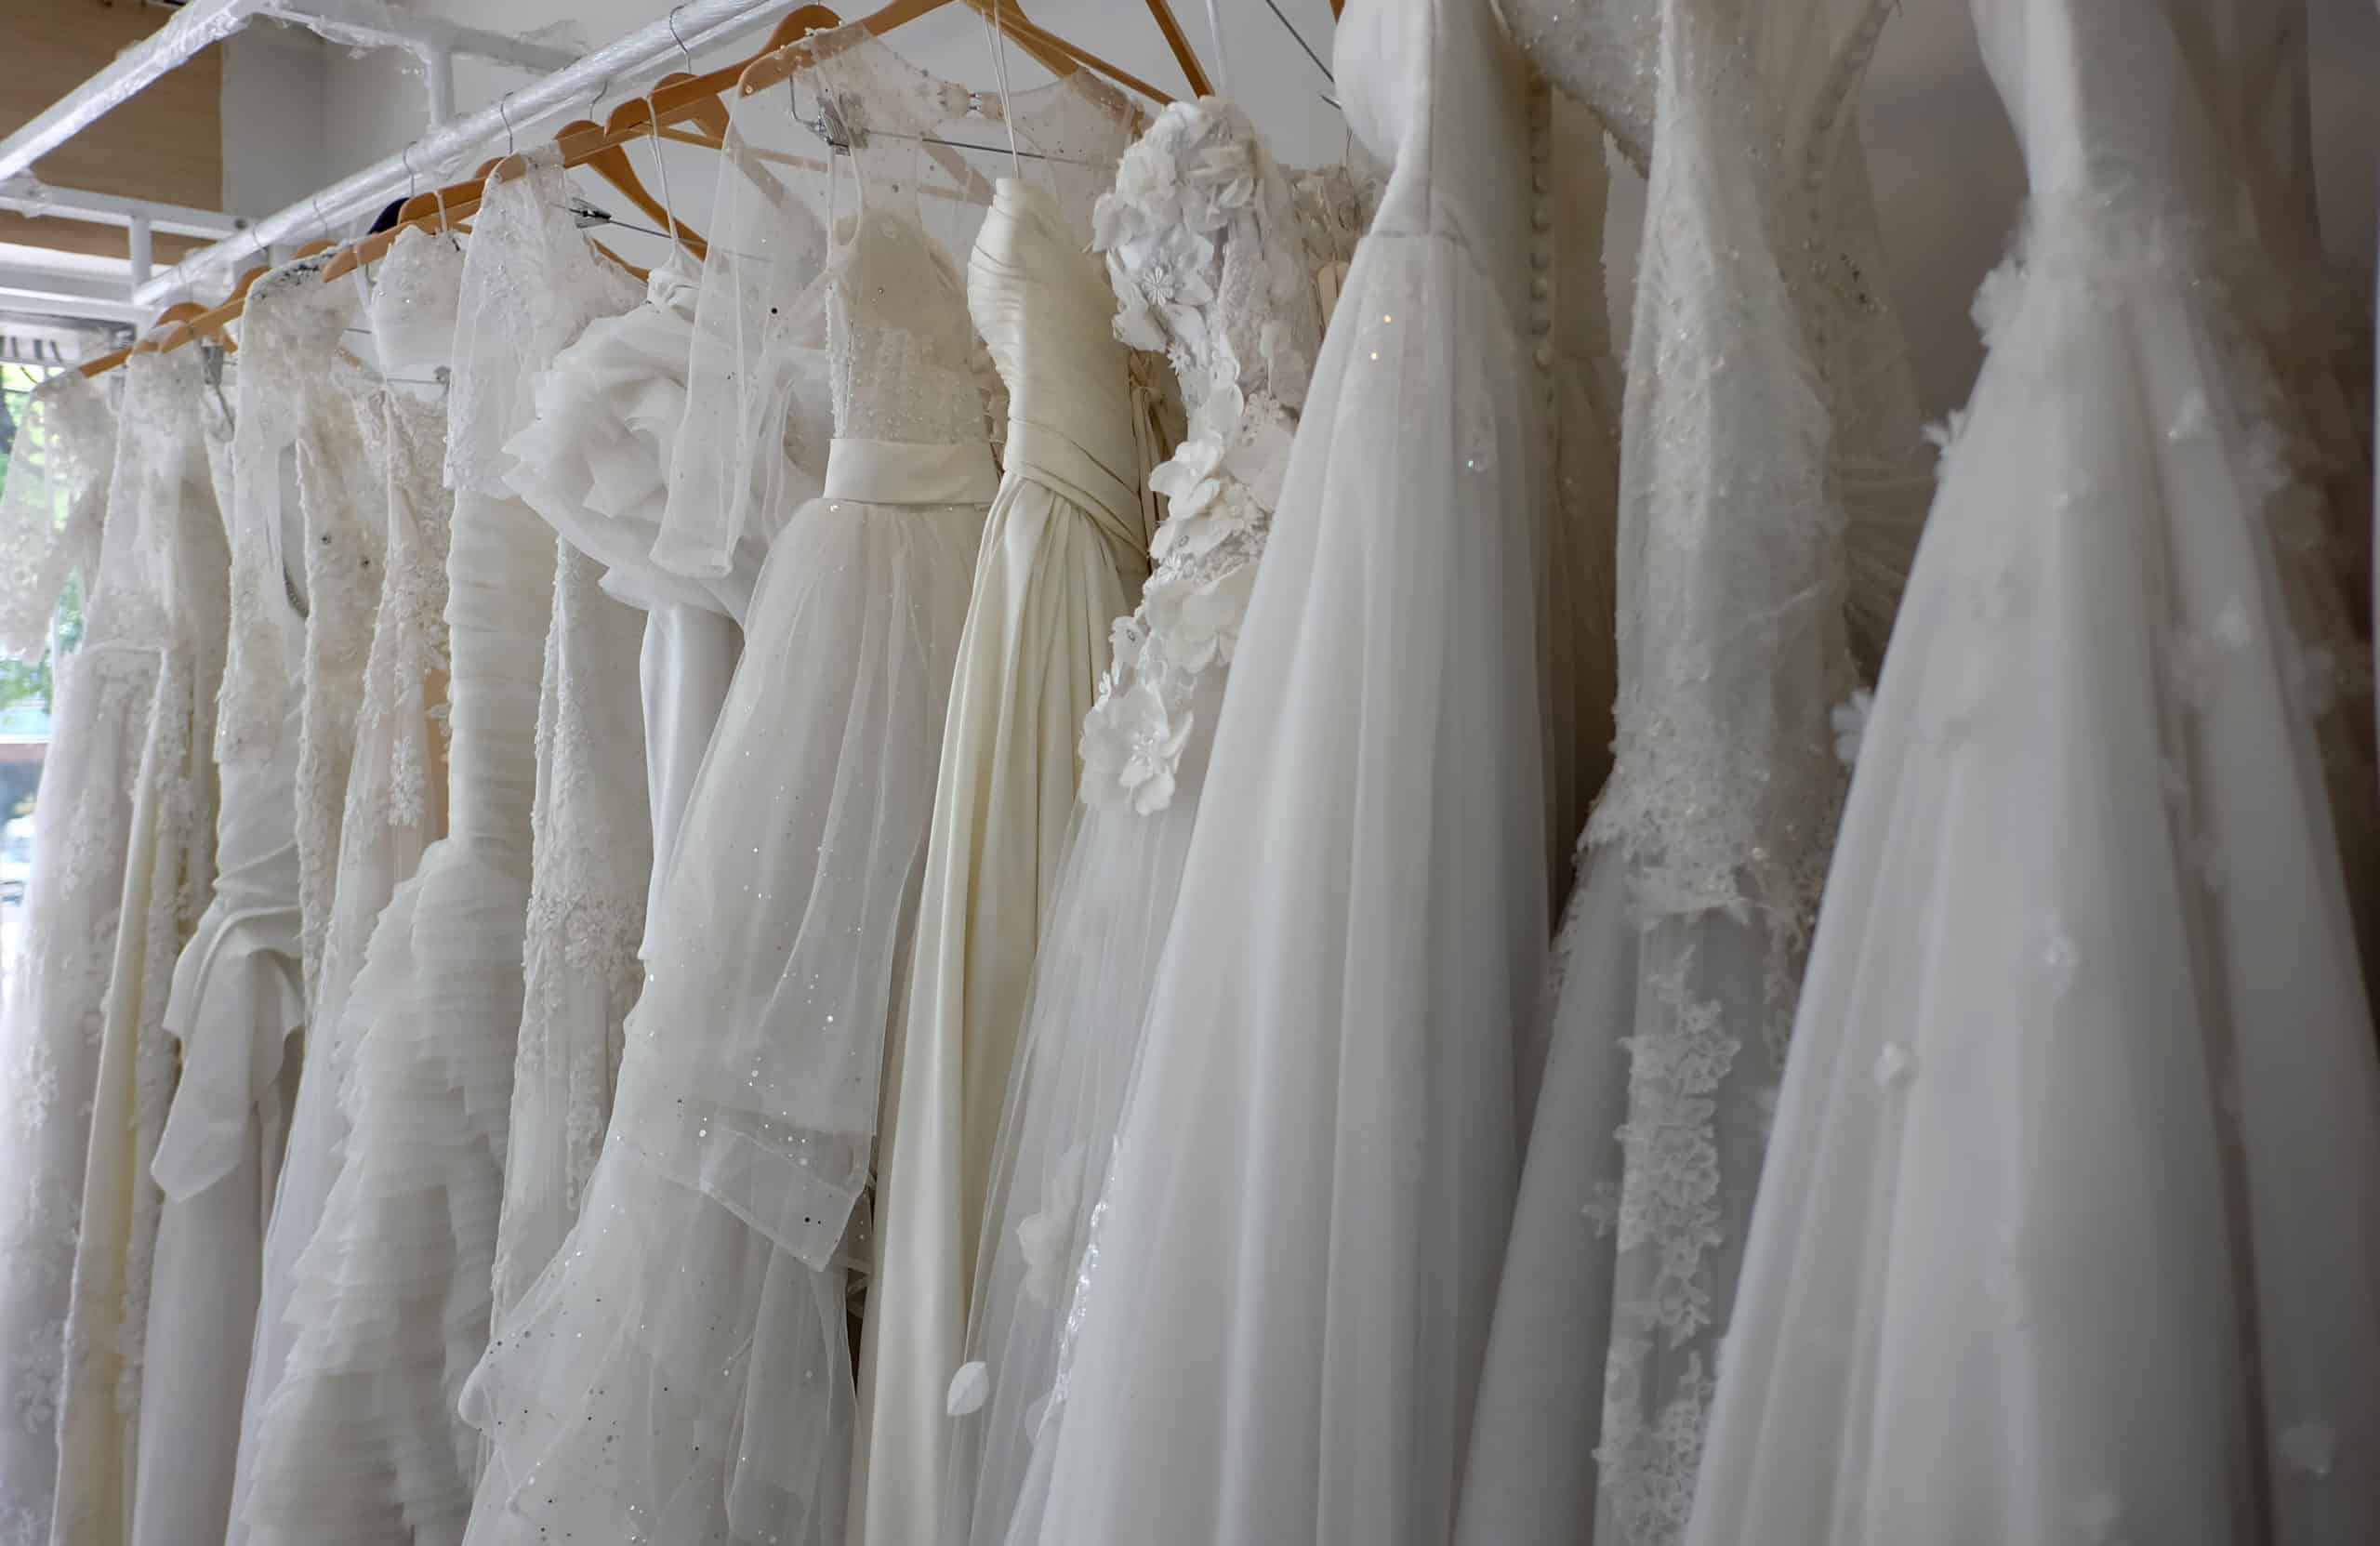 Would you rent your wedding dress? | Holmewood Hall